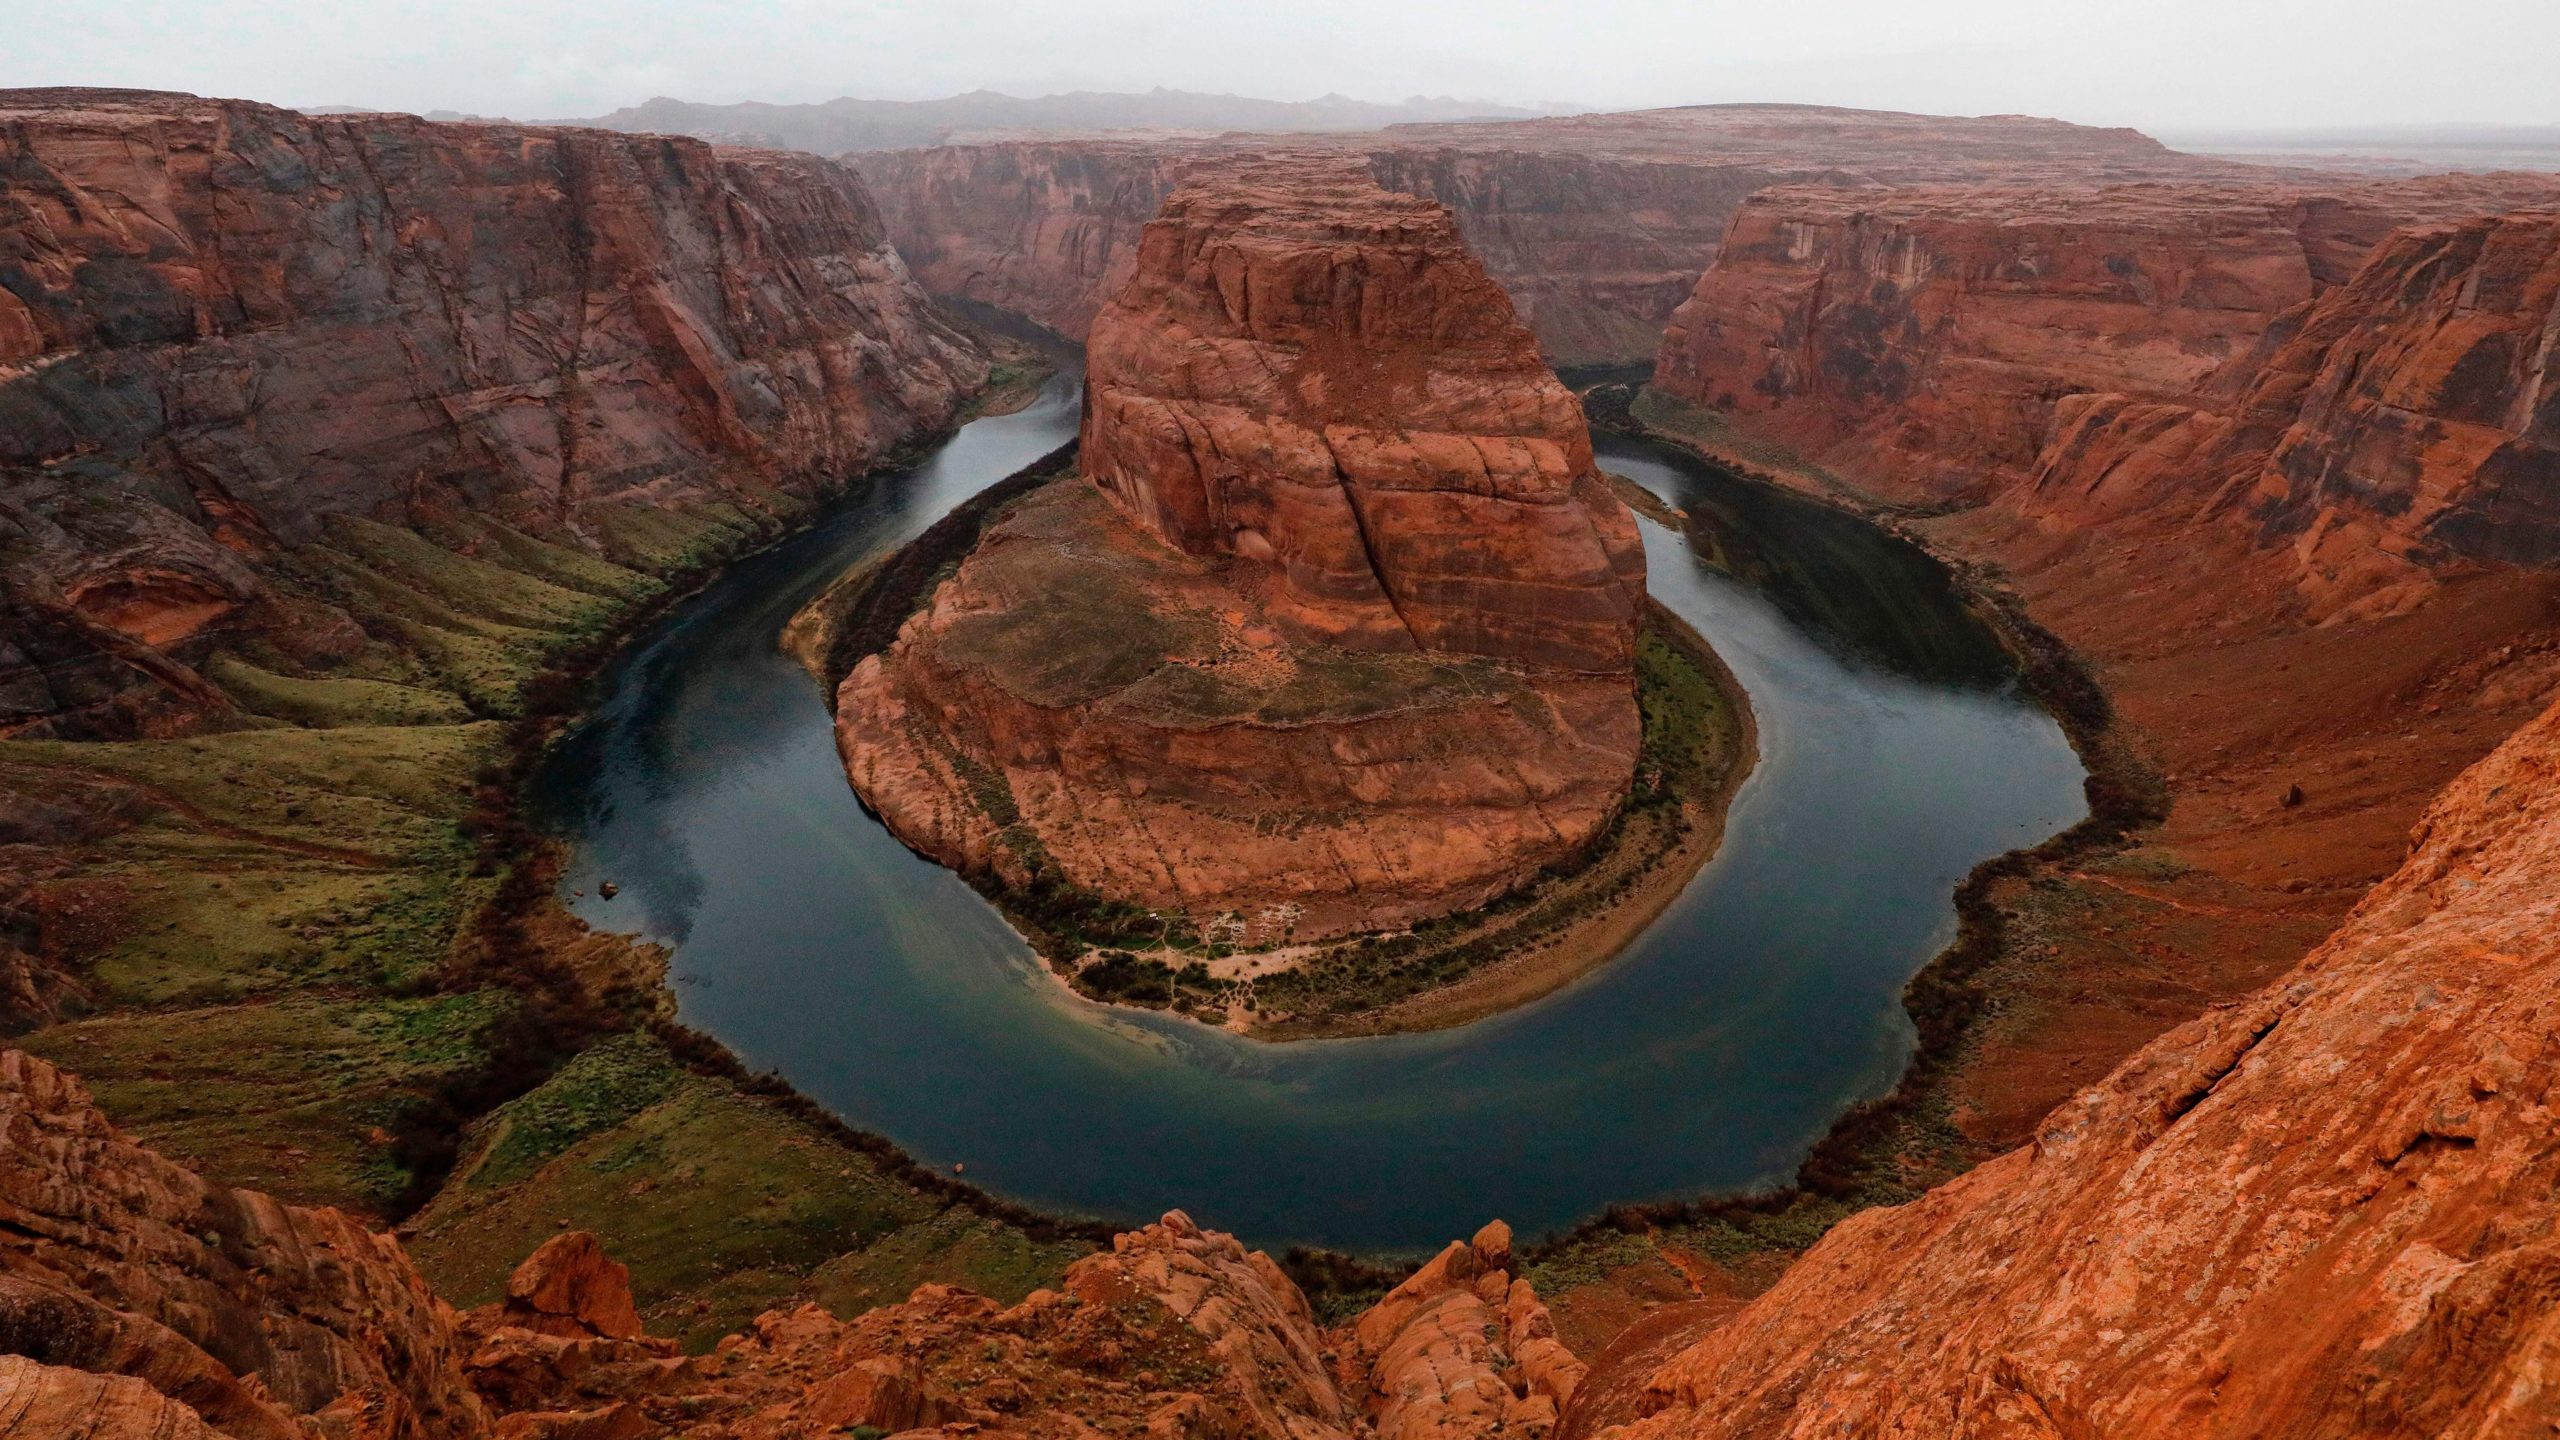 The Colorado River wraps around Horseshoe Bend in the in Glen Canyon National Recreation Area in Page, Arizona. (Photo: Rhona Wise/AFP, Getty Images)